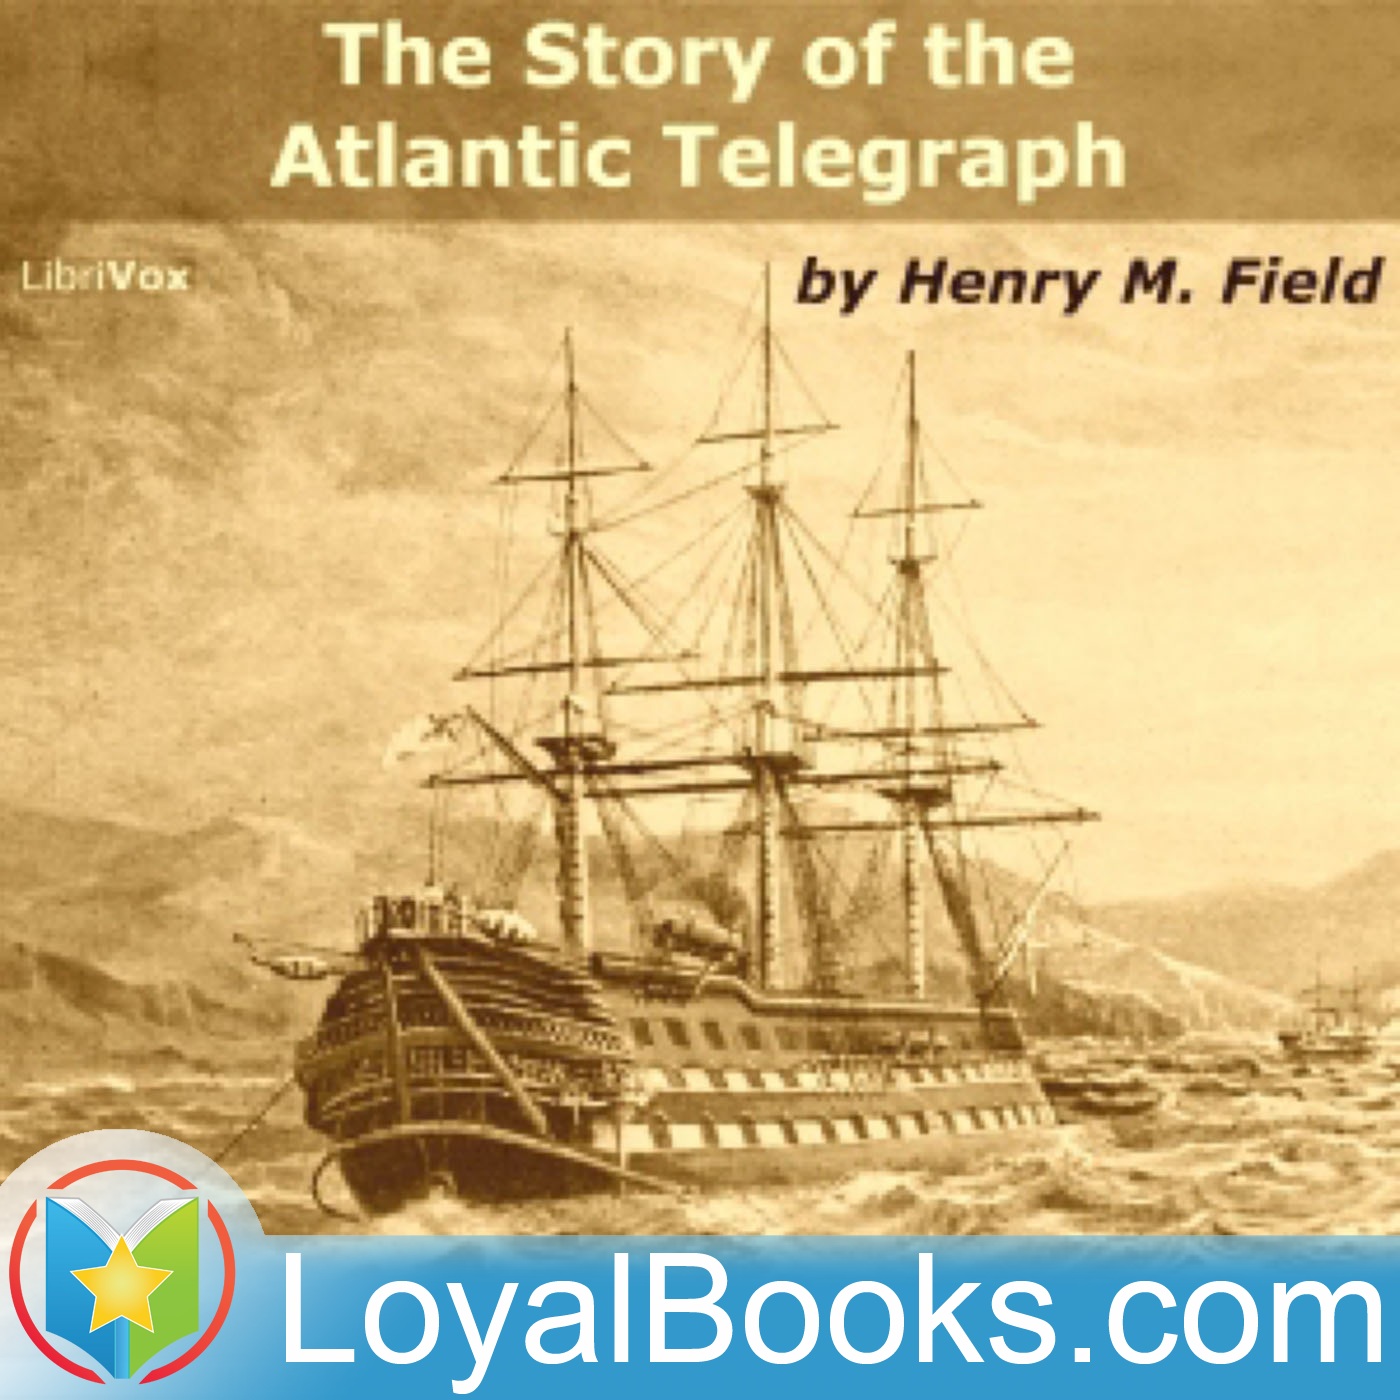 The Story of the Atlantic Telegraph by Henry M. Field